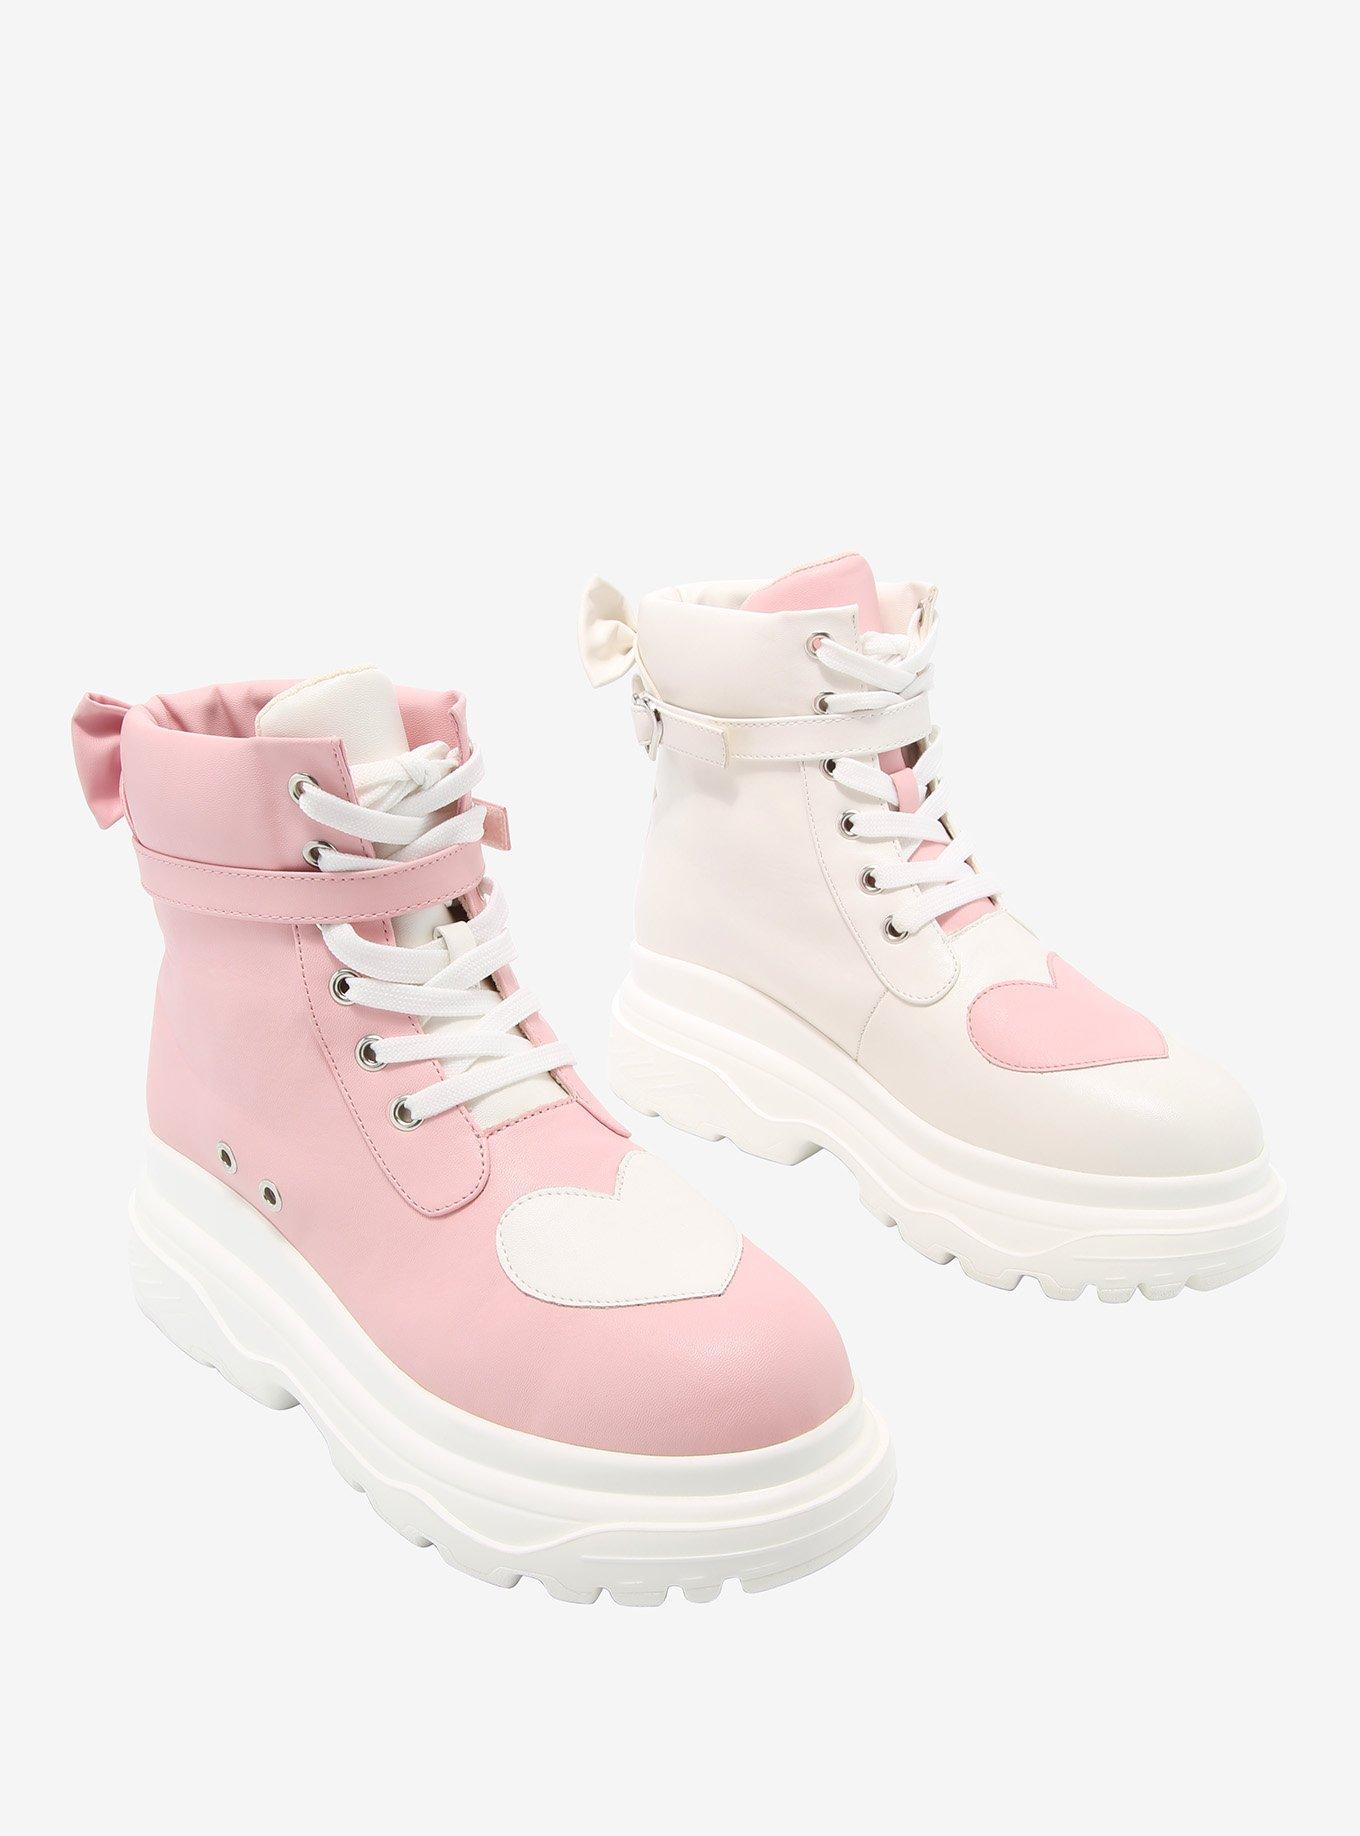 Mateo pink trio biosourced & recycled high-top sneaker